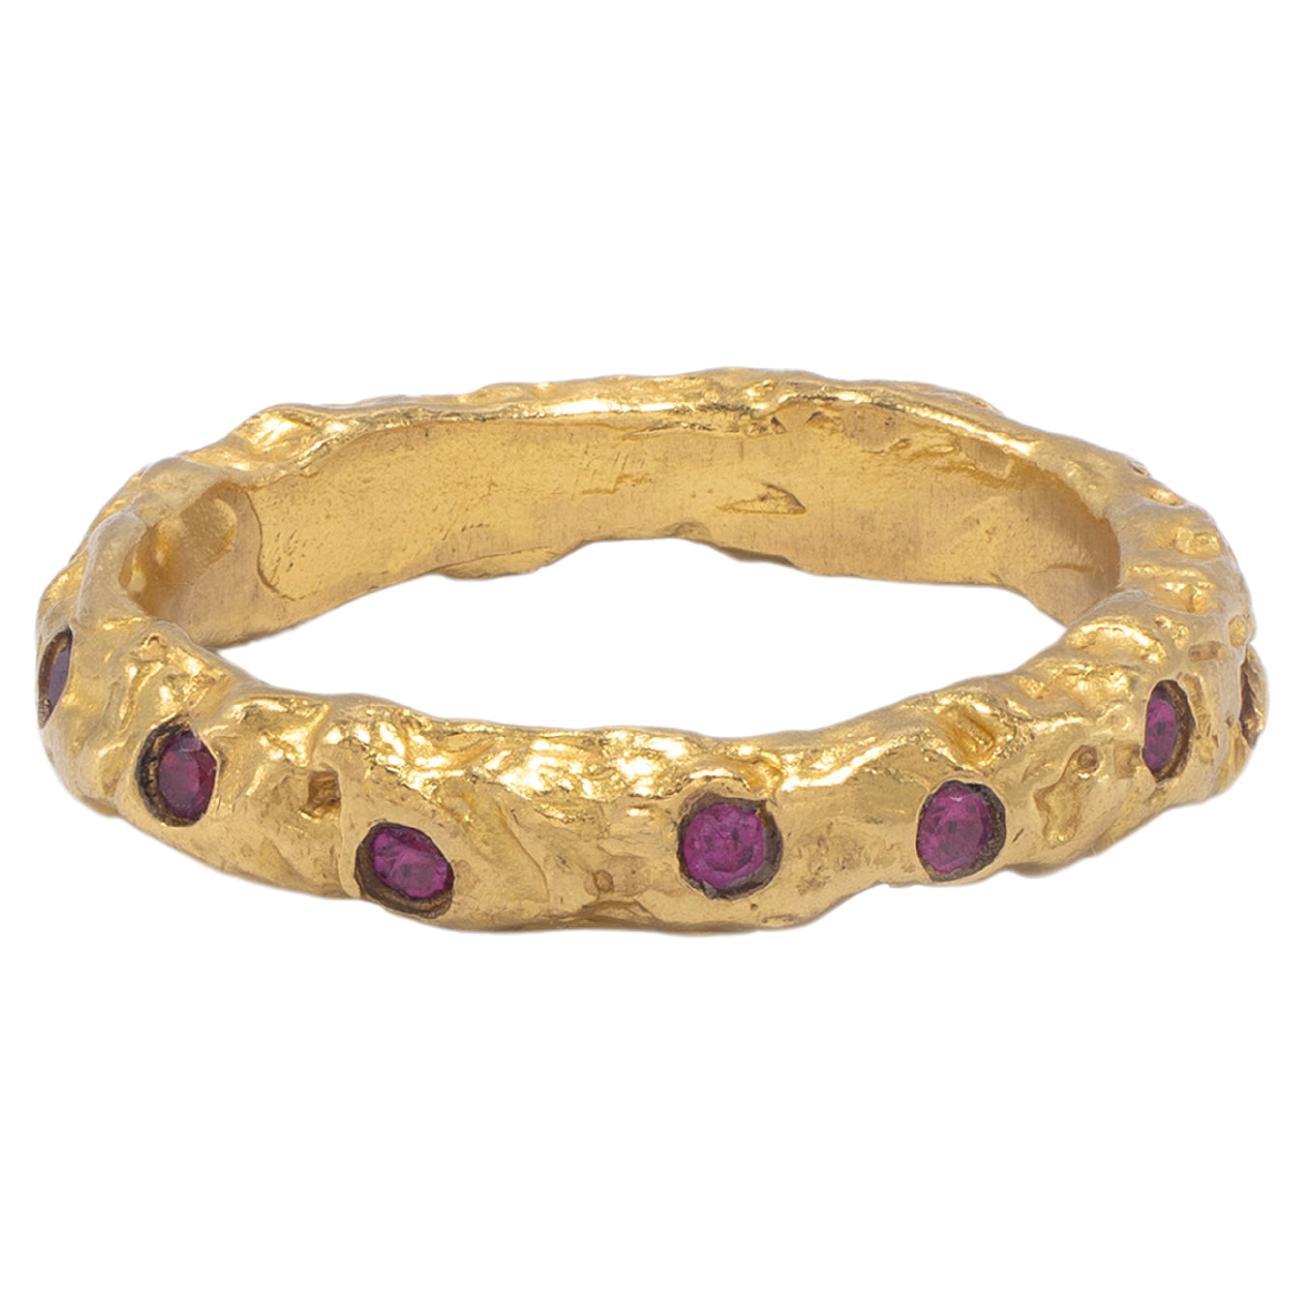 22k Gold Chunky Foil Stacking Rings with Red Sapphires, by Tagili